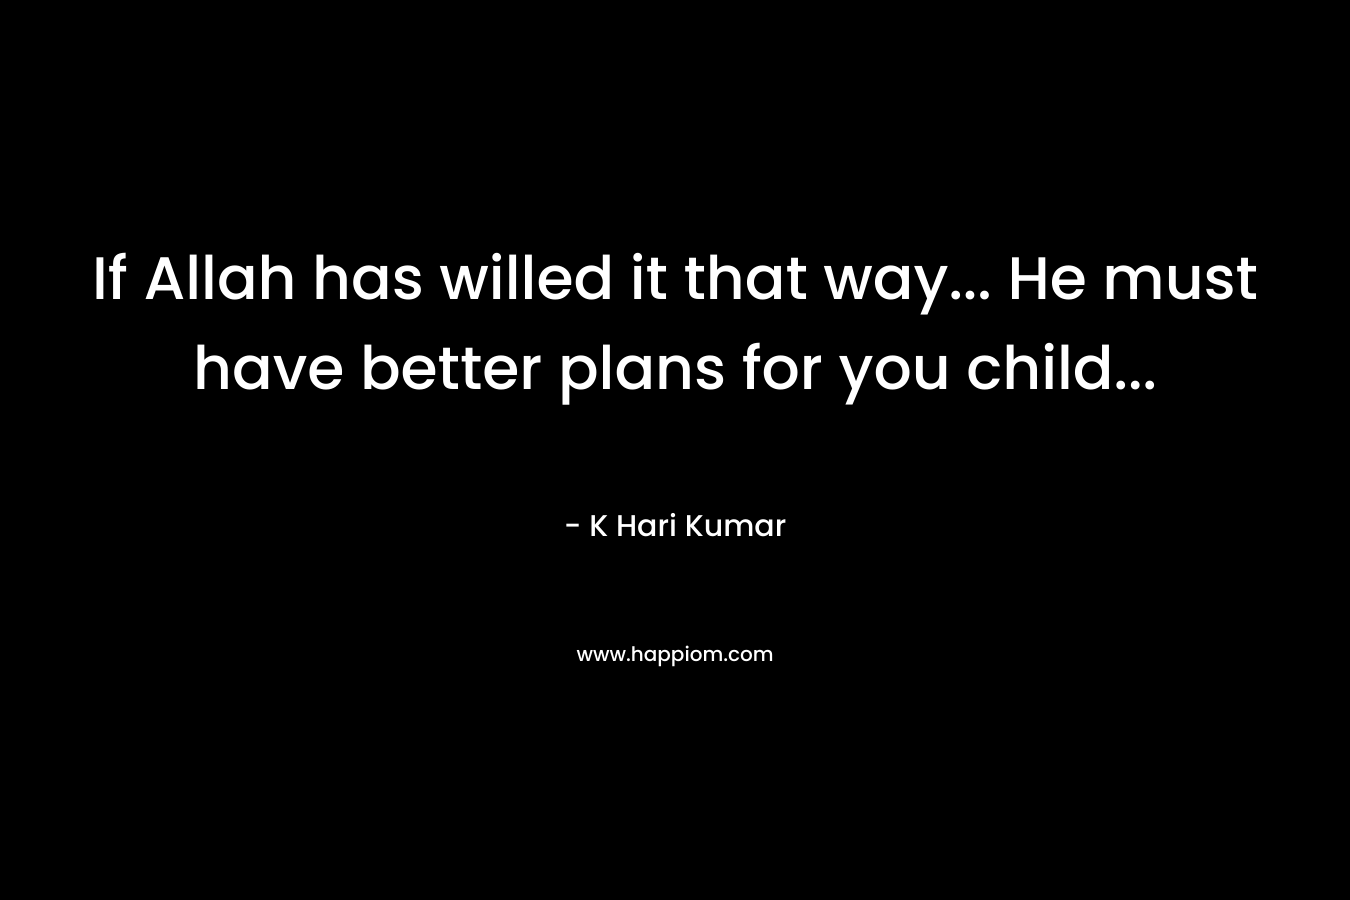 If Allah has willed it that way... He must have better plans for you child...